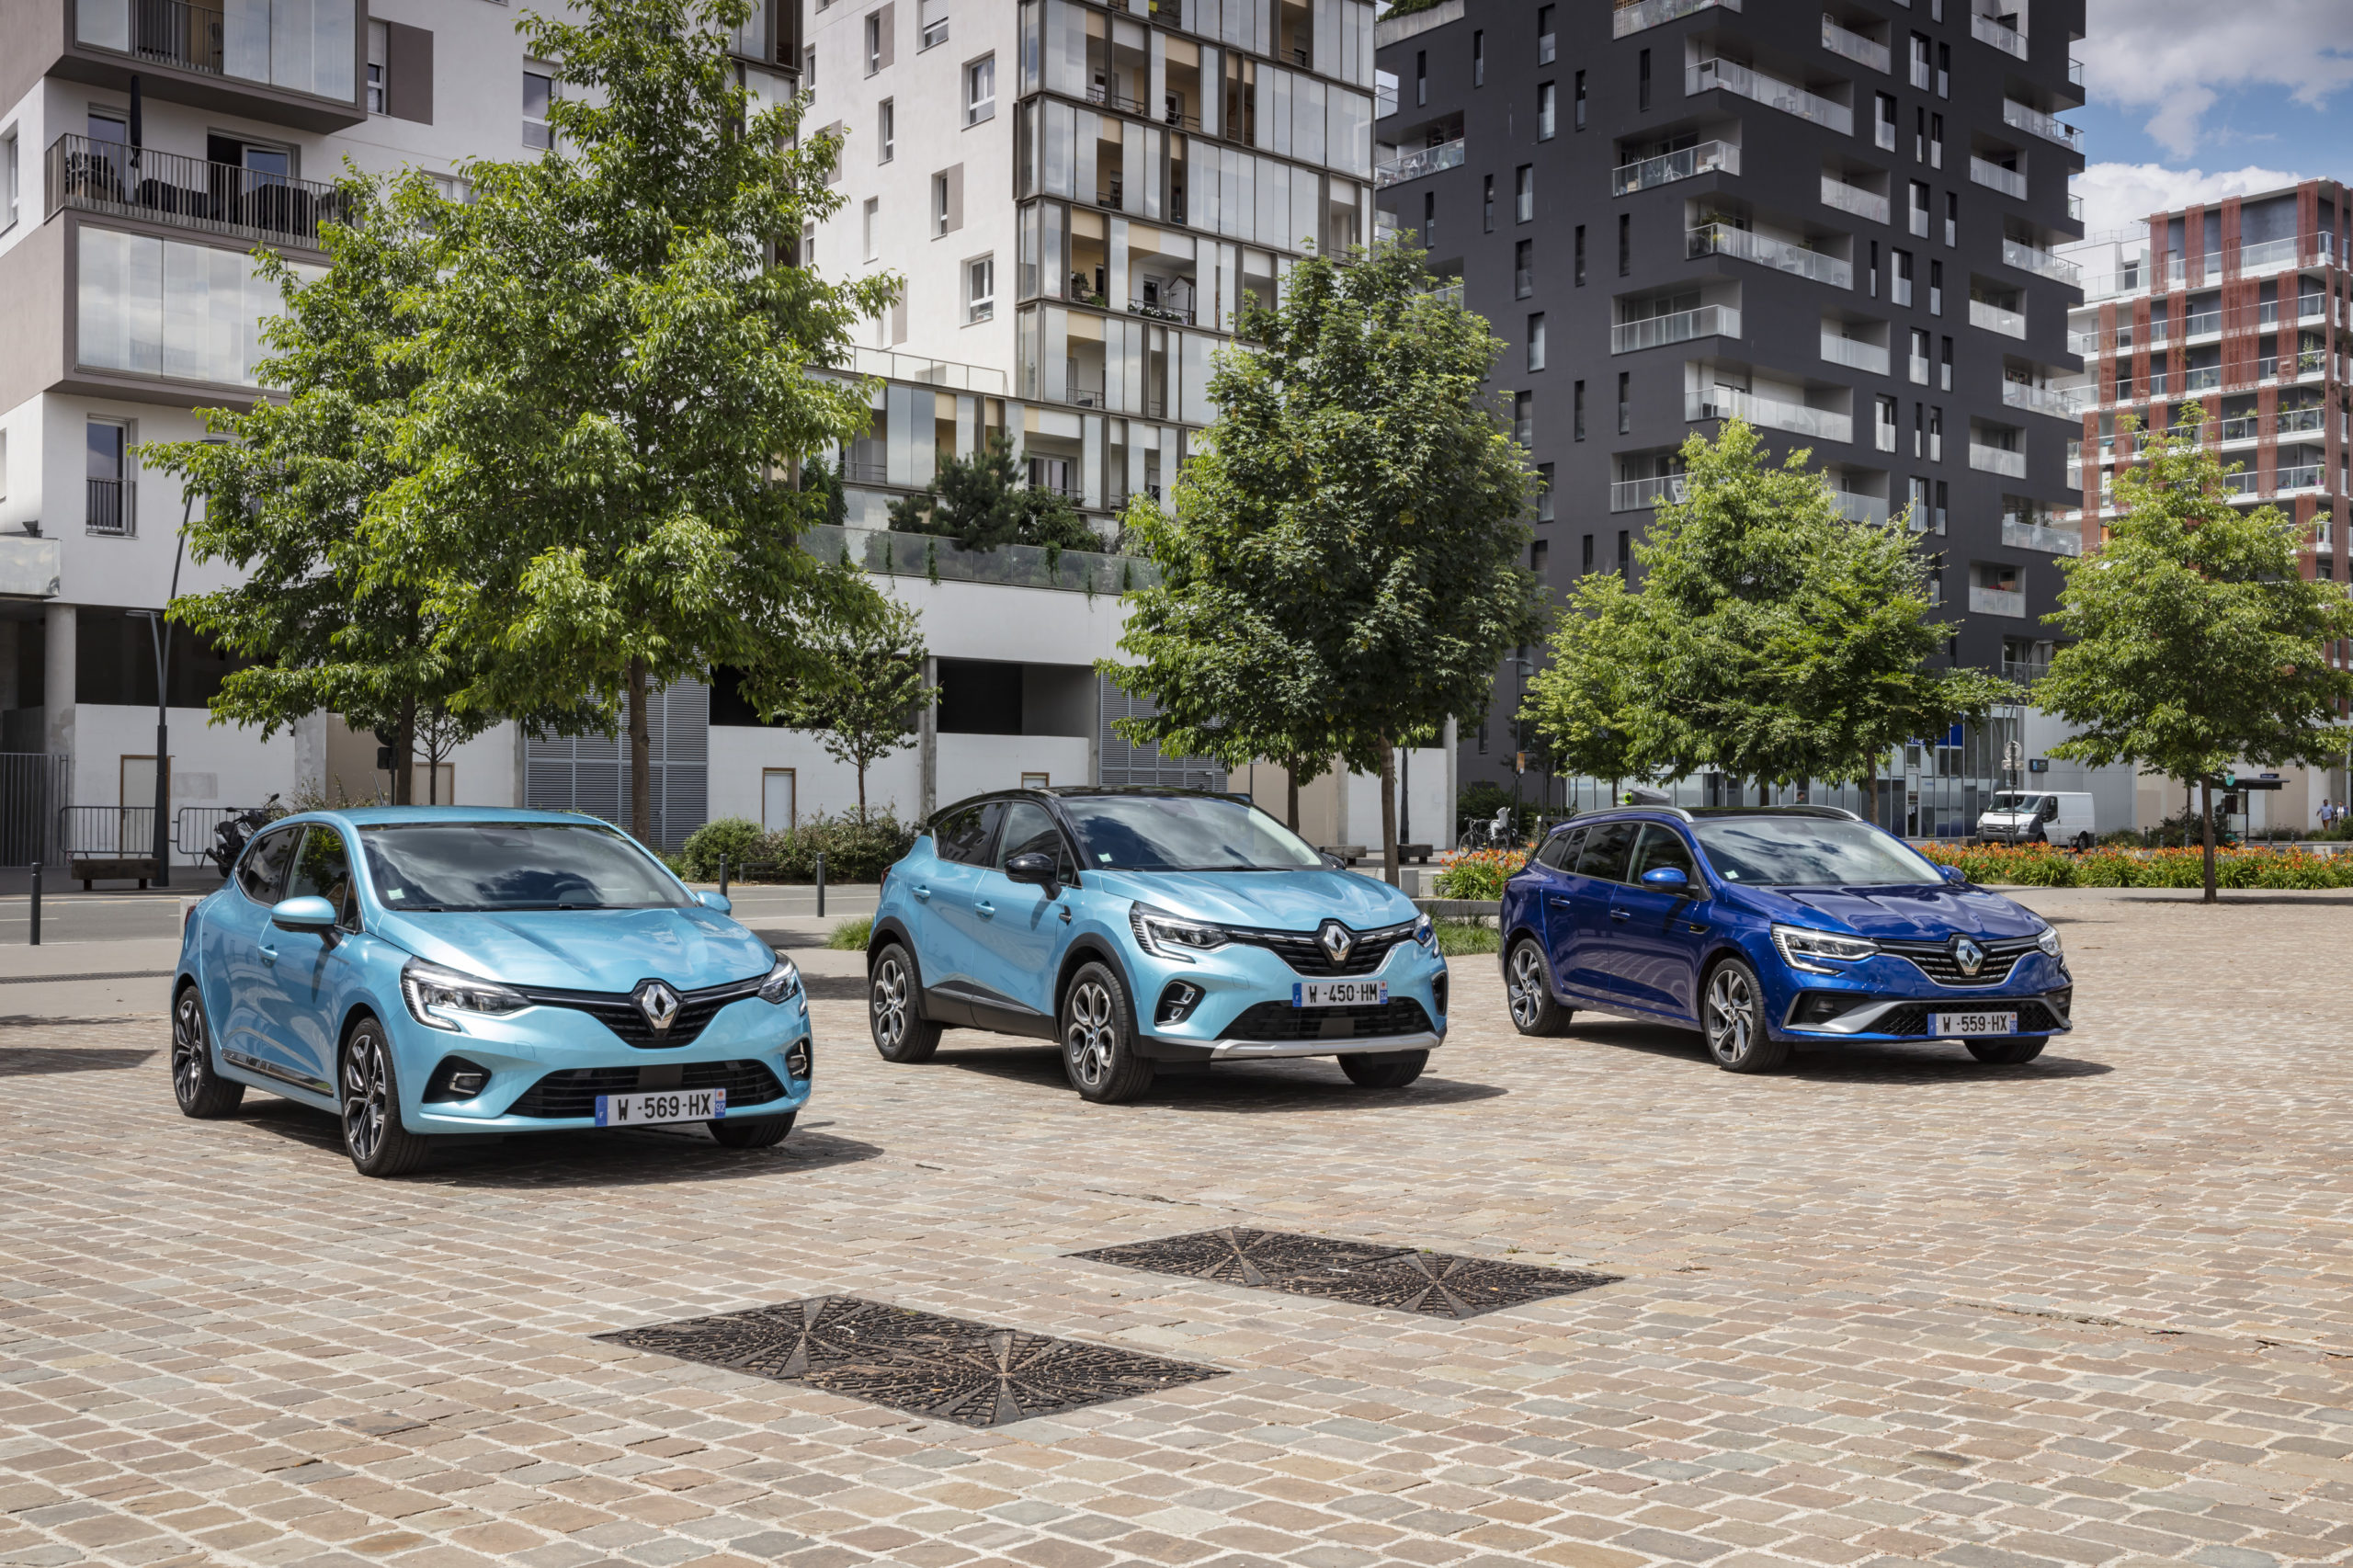 Renault in 2020: CAFE objectives reached and 21,3% sales drop